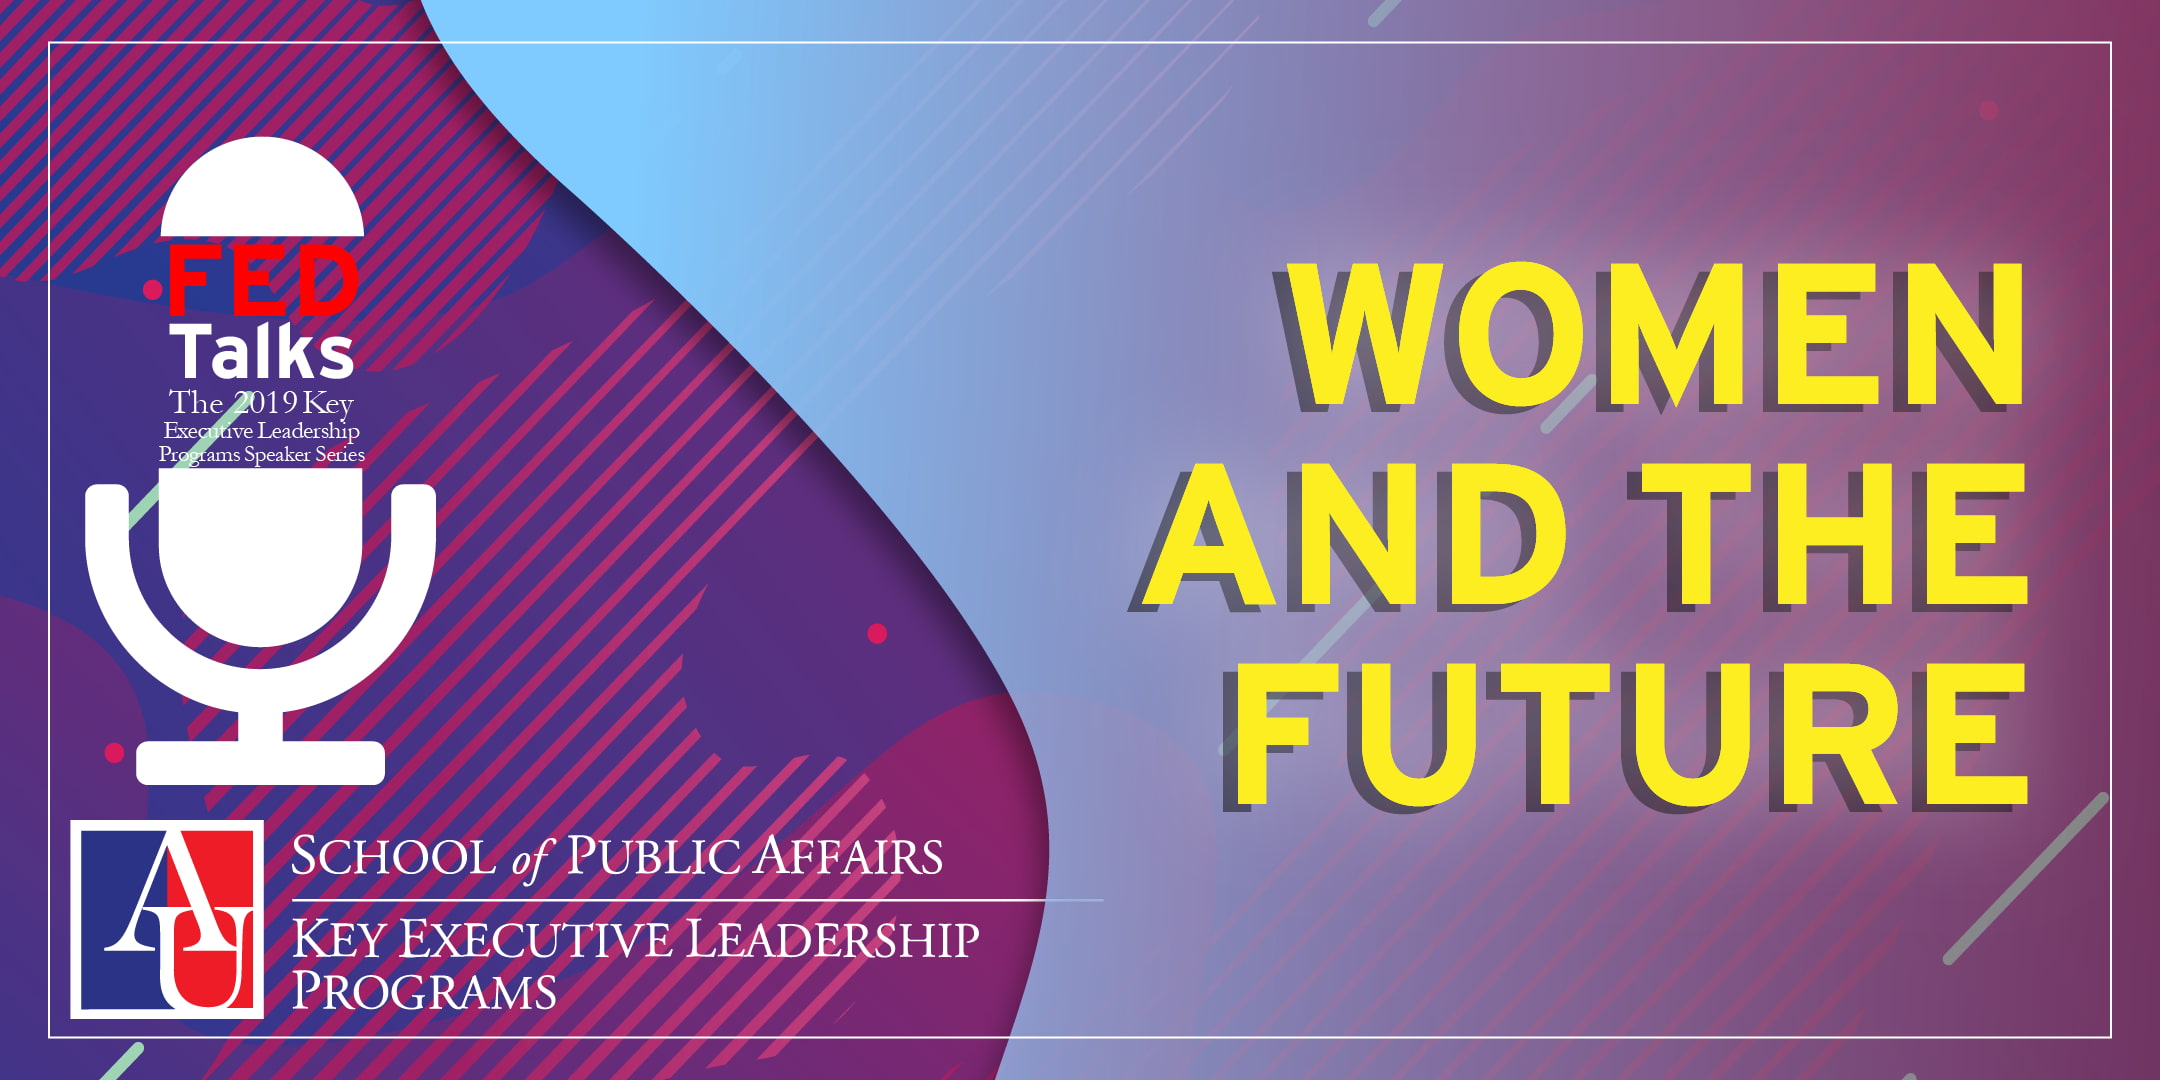 Women and the Future FEDTalks from April 2019